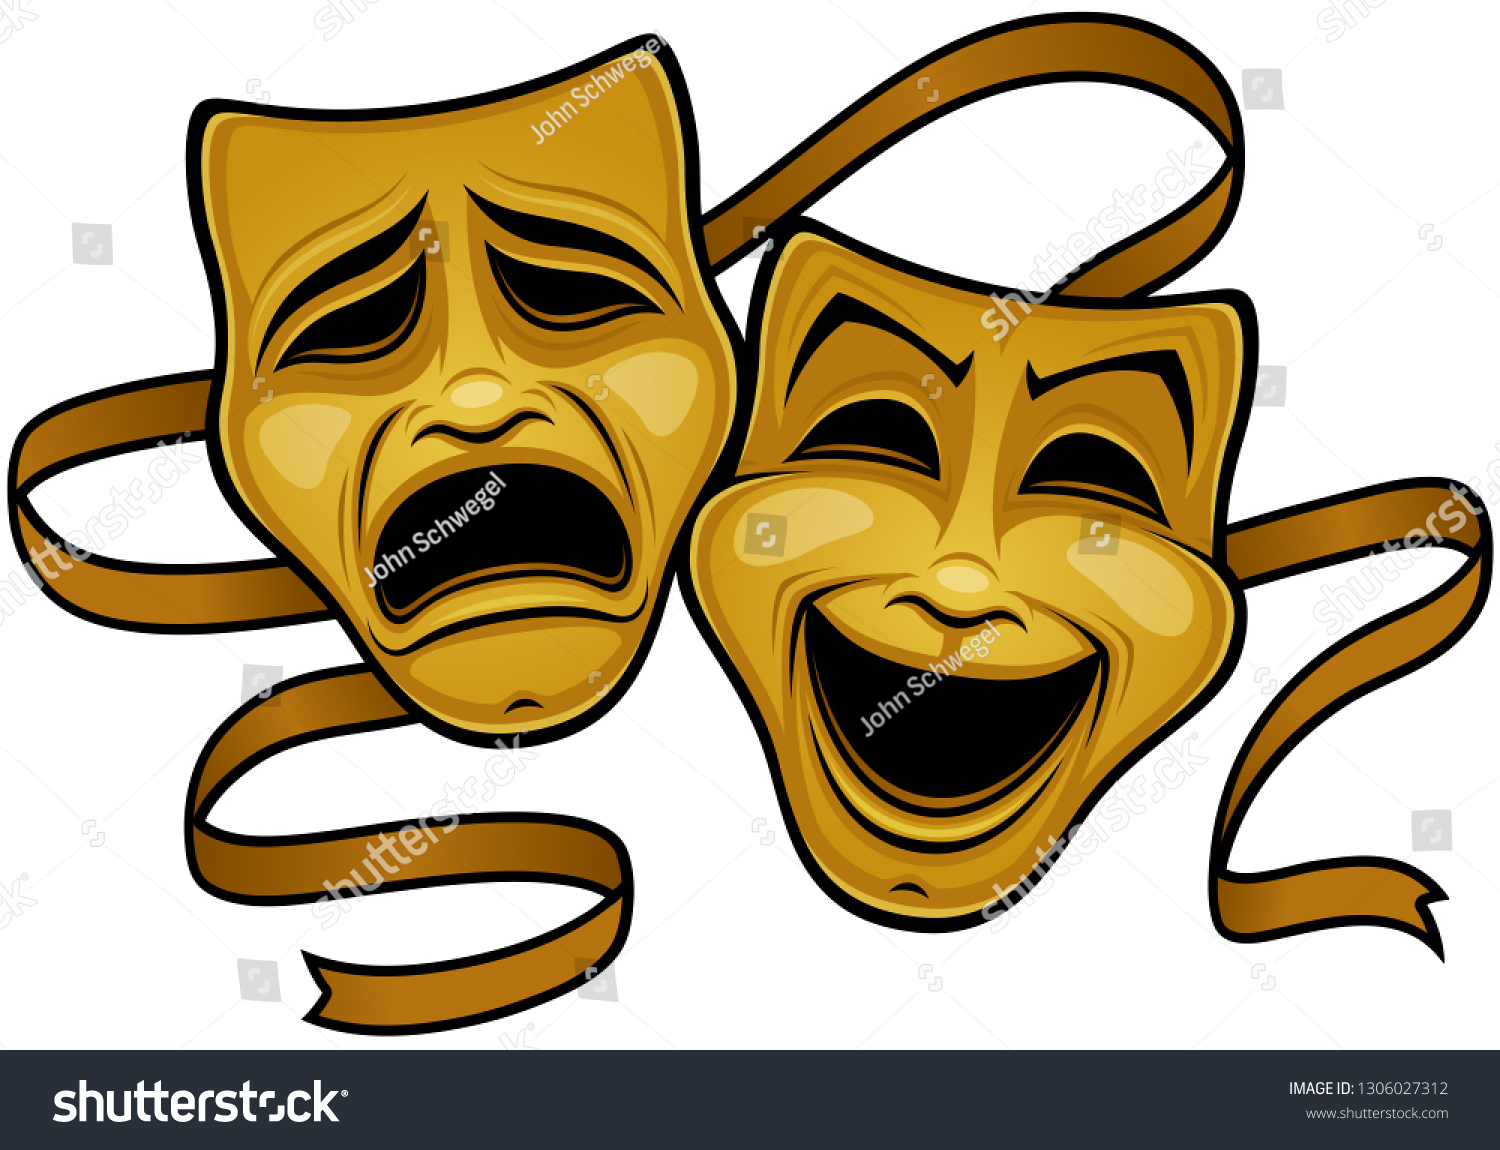 Gold Comedy And Tragedy Theater Masks. Vector illustration of gold comedy and tragedy theater masks with a gold ribbon.  #1306027312